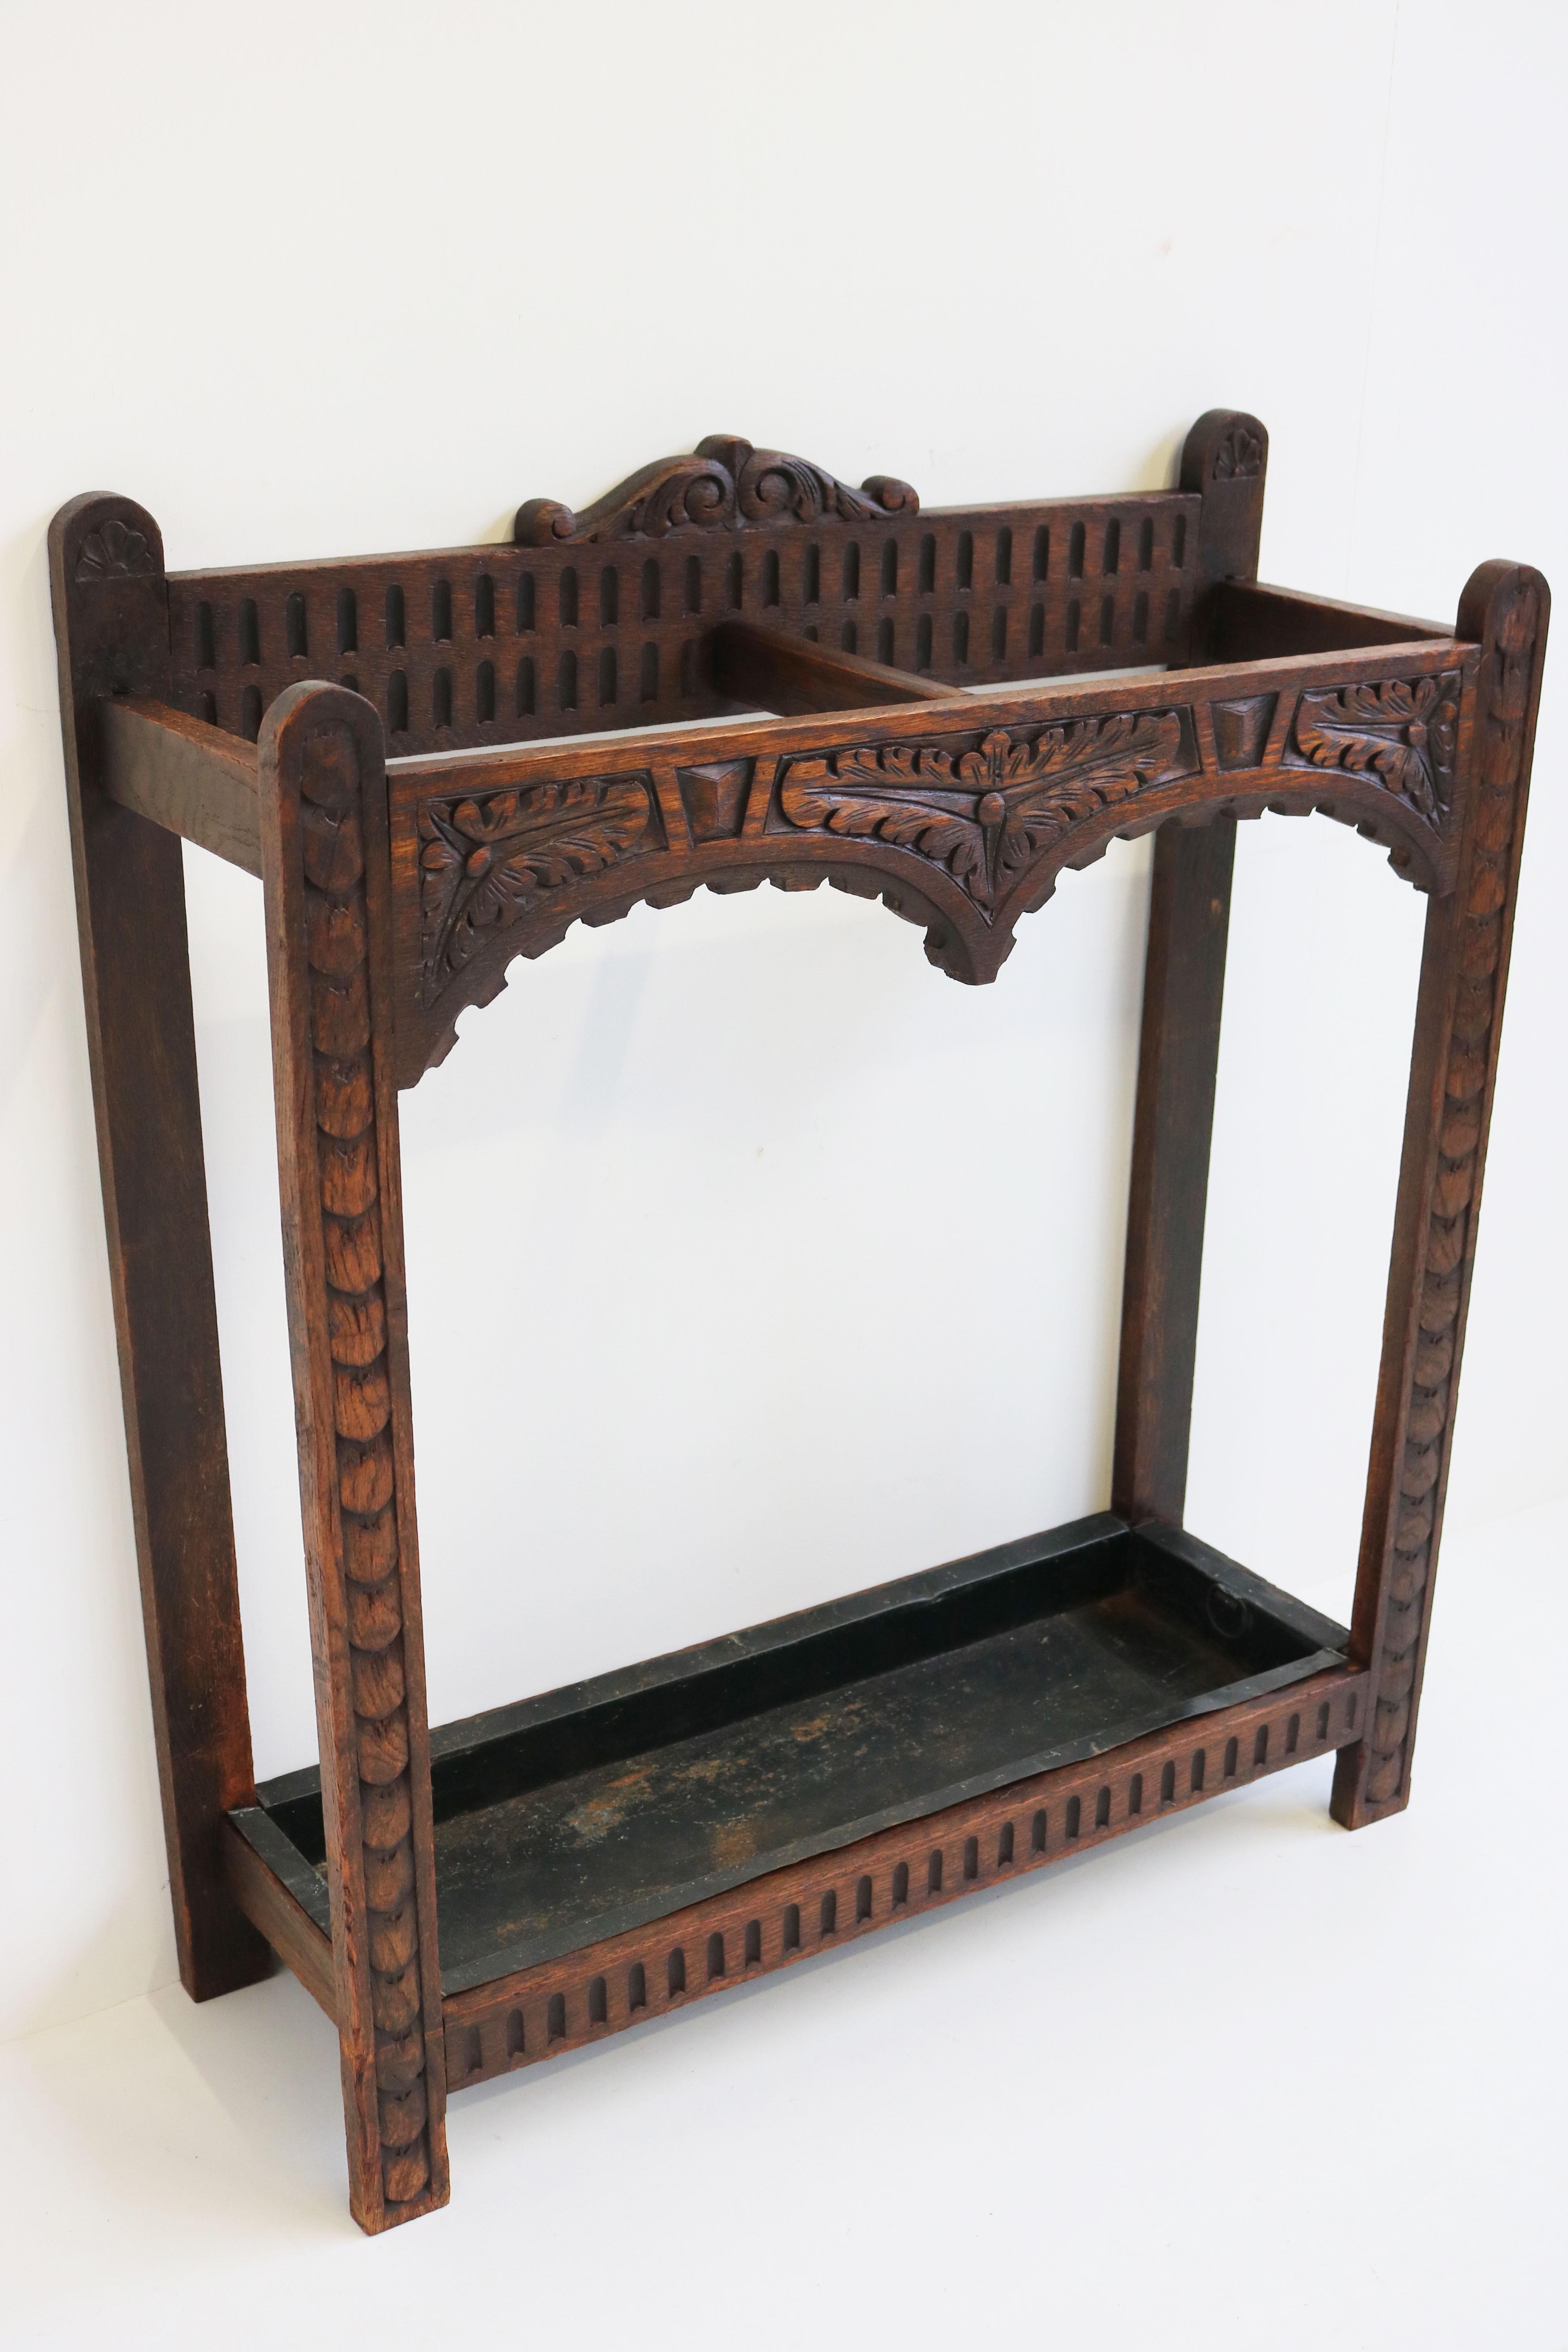 Antique 19th Century French Renaissance Revival Umbrella Stand / Stick Holder For Sale 5